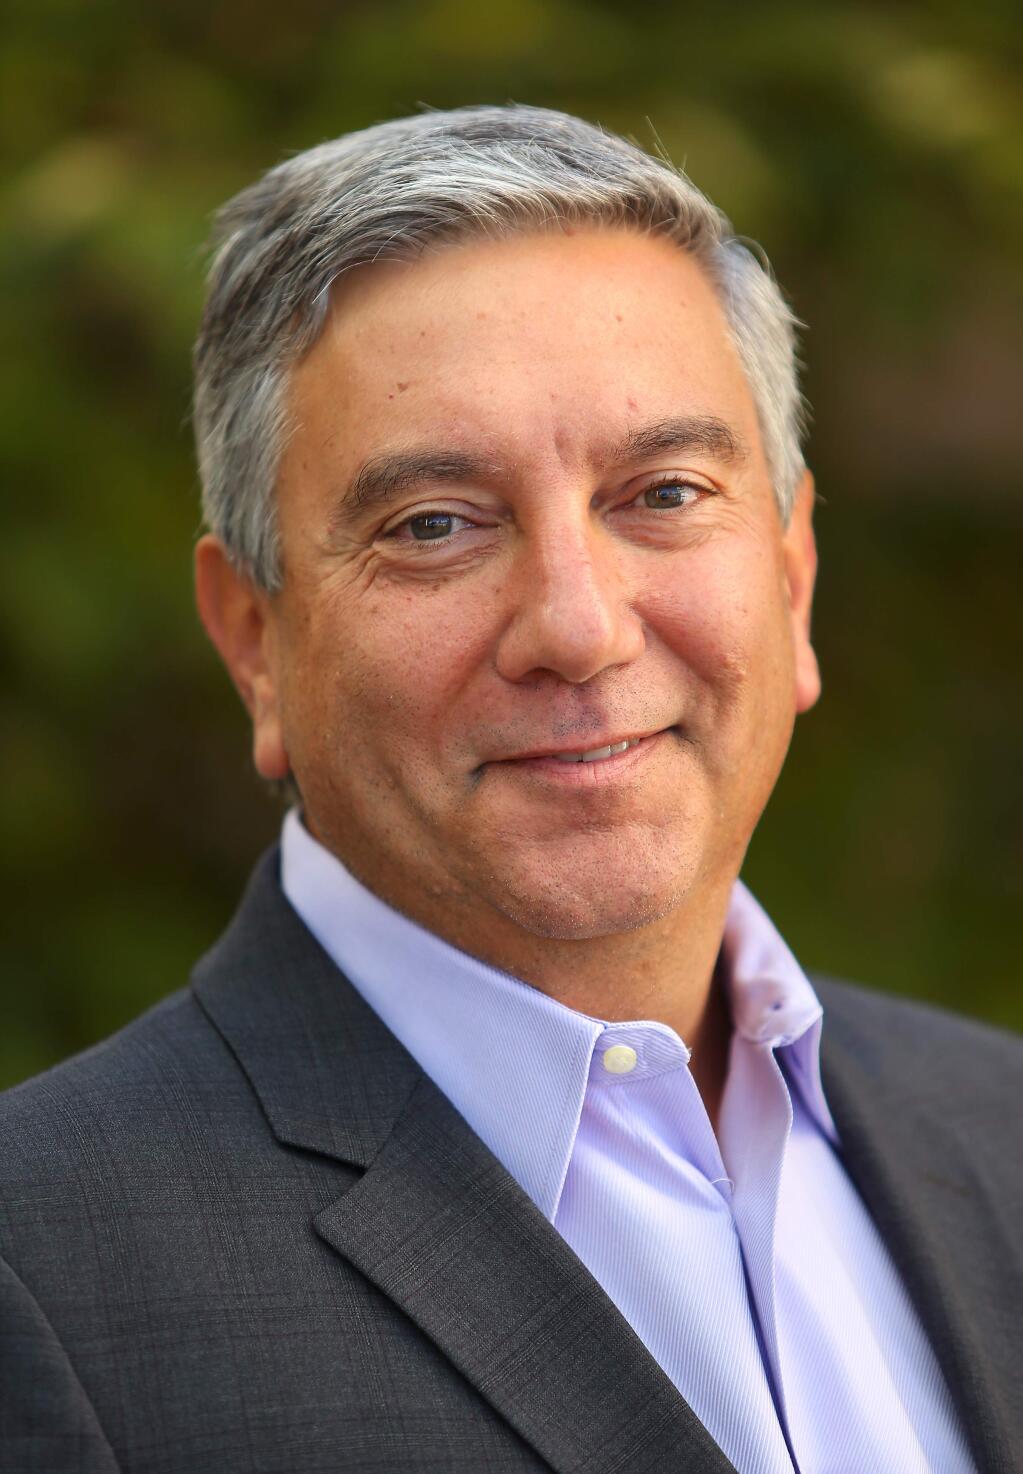 Keysight Technologies President and CEO Ron Nersesian is named chairman of the board in November 2019. (Christopher Chung / The Press Democrat)